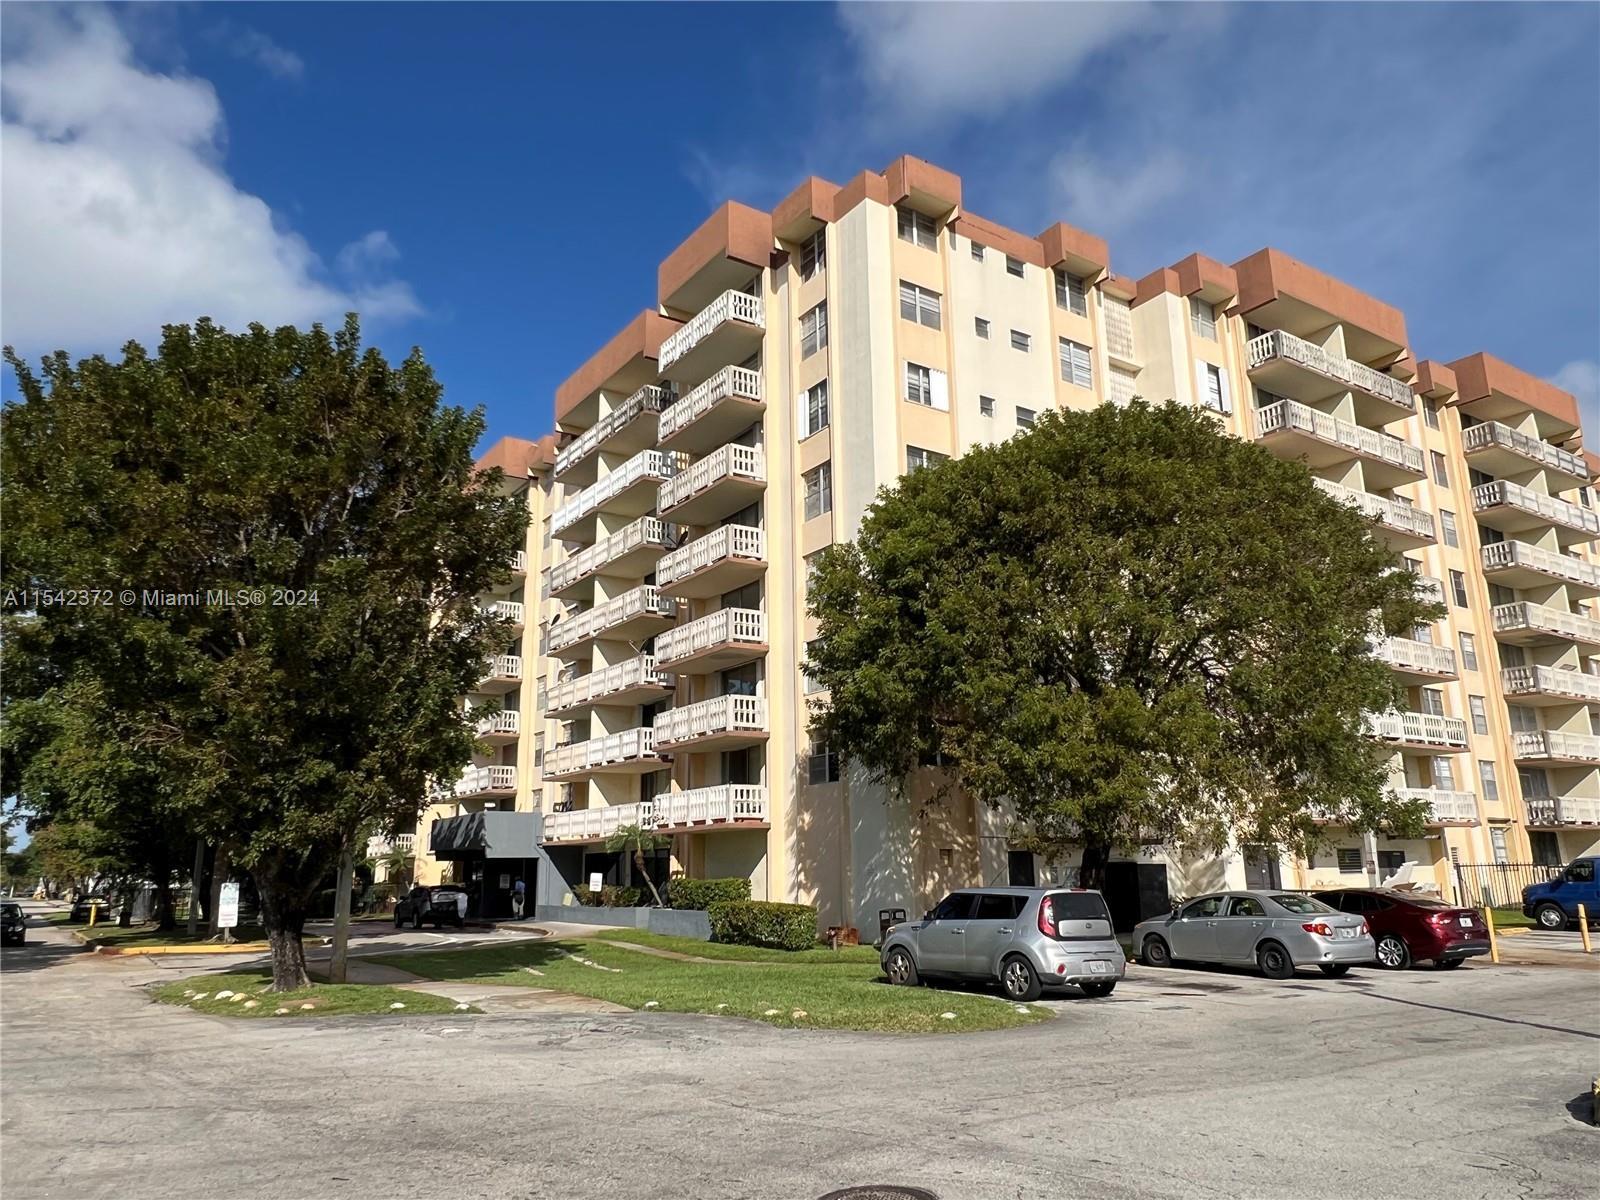 Photo of 15600 NW 7th Ave #514 in Miami, FL